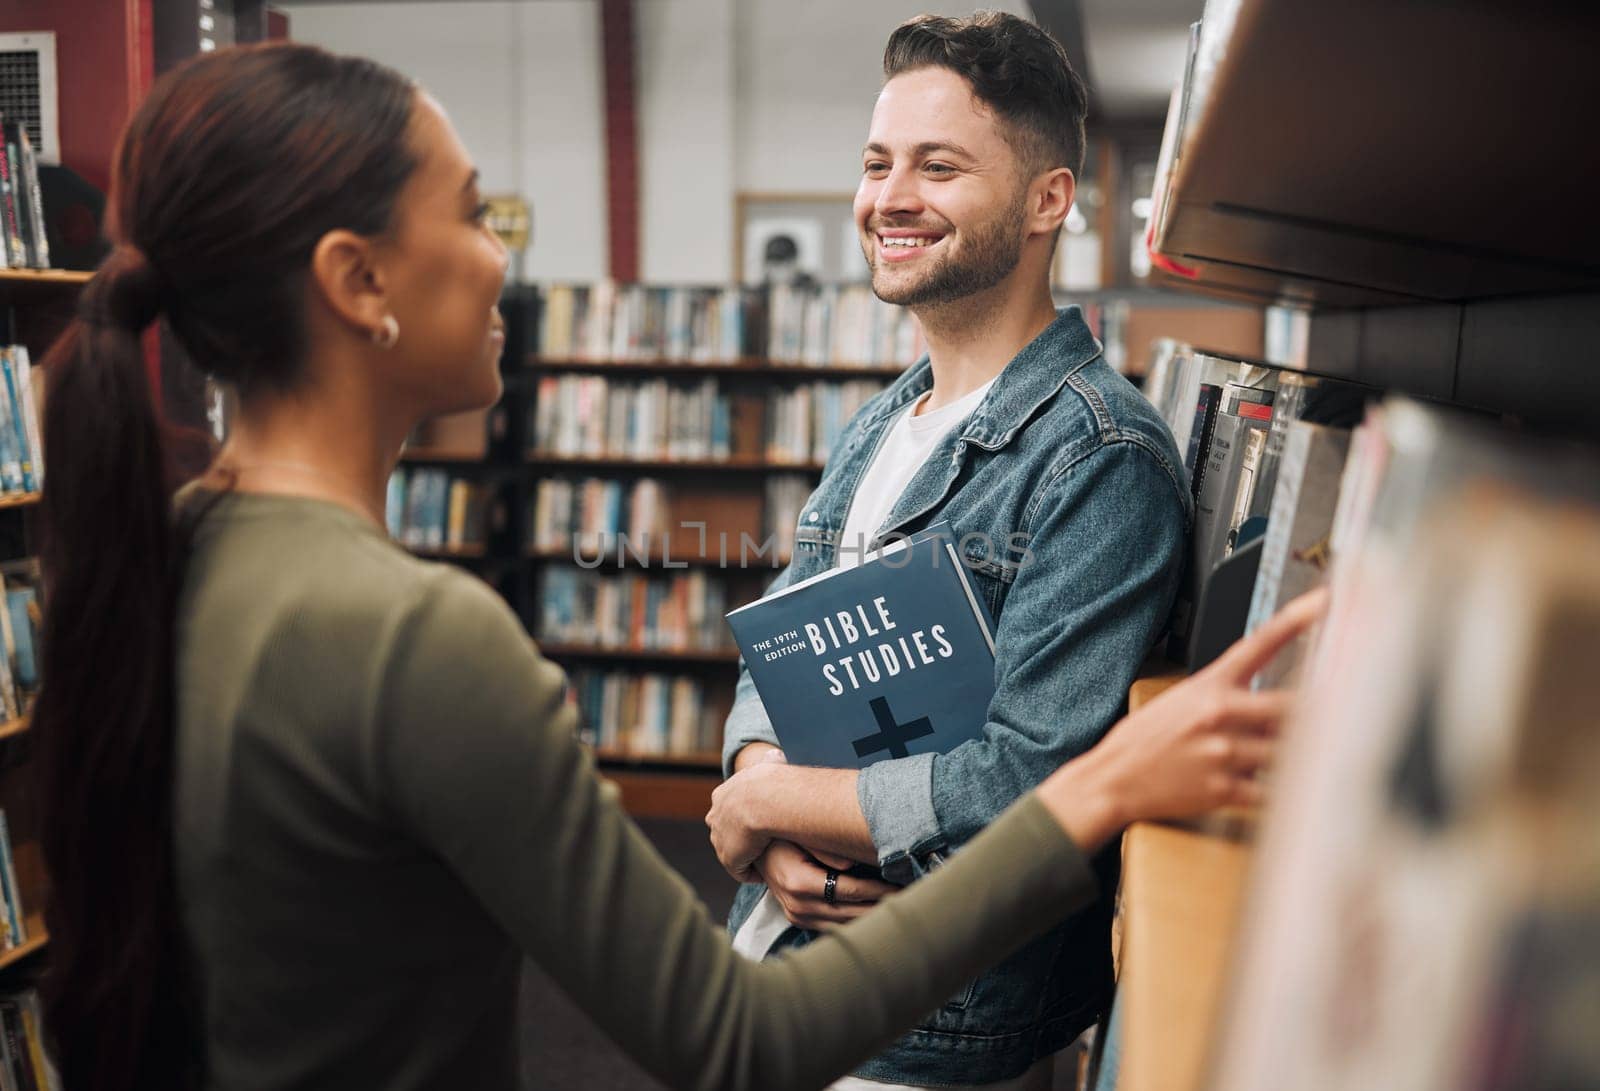 Woman, man and library for reading, talking and knowledge for studies. Students, male and female in bookstore, education or research for literature, study and for books to read, conversation or smile.